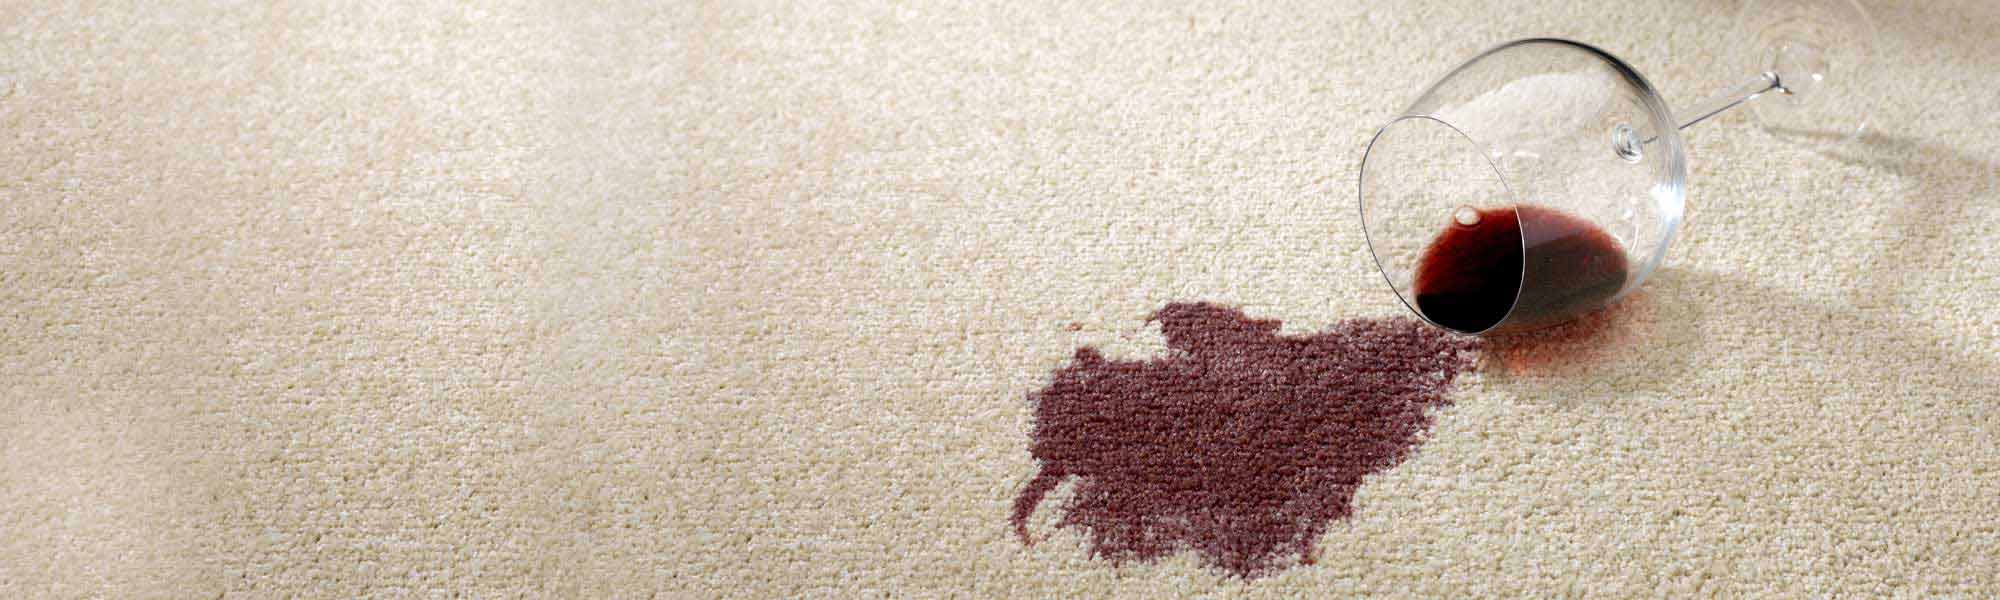 Professional Stain Removal and Carpet Stain Remover Service by Chem-Dry by Leonard in San Francisco CA